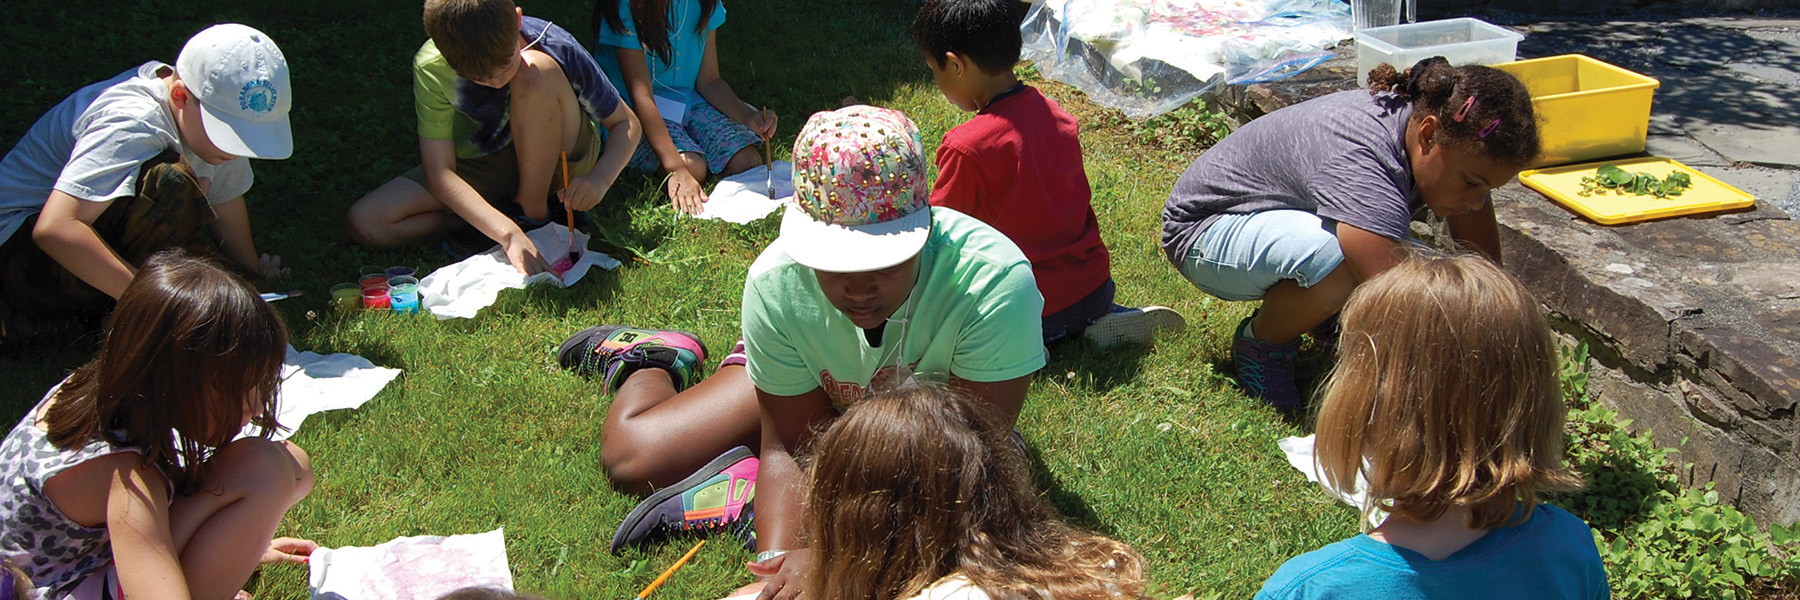 Registration Opens for Shelburne Museum’s Summer Camps on February 1 